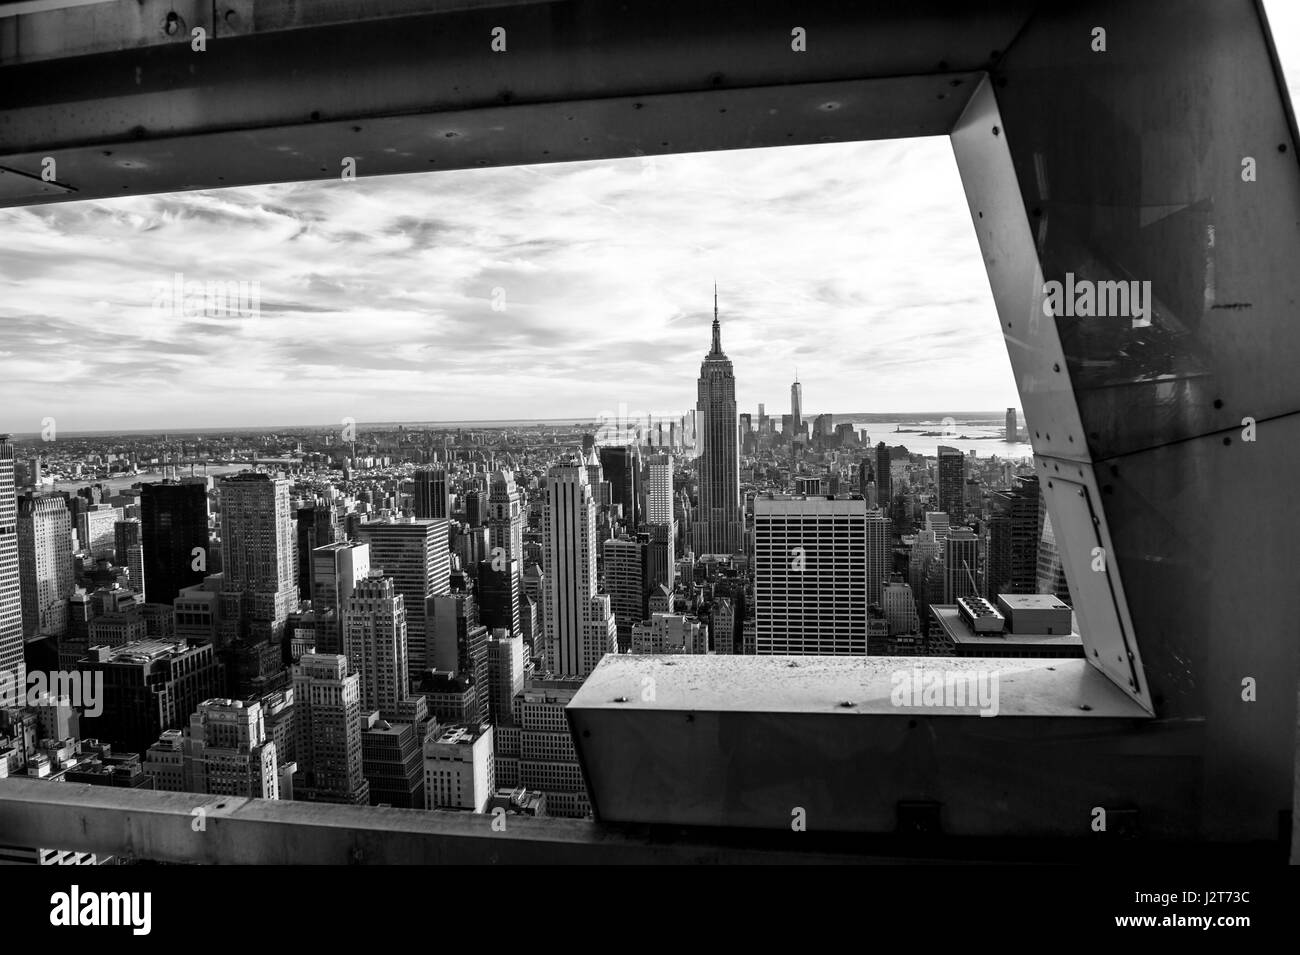 New York city in black and white. Stock Photo